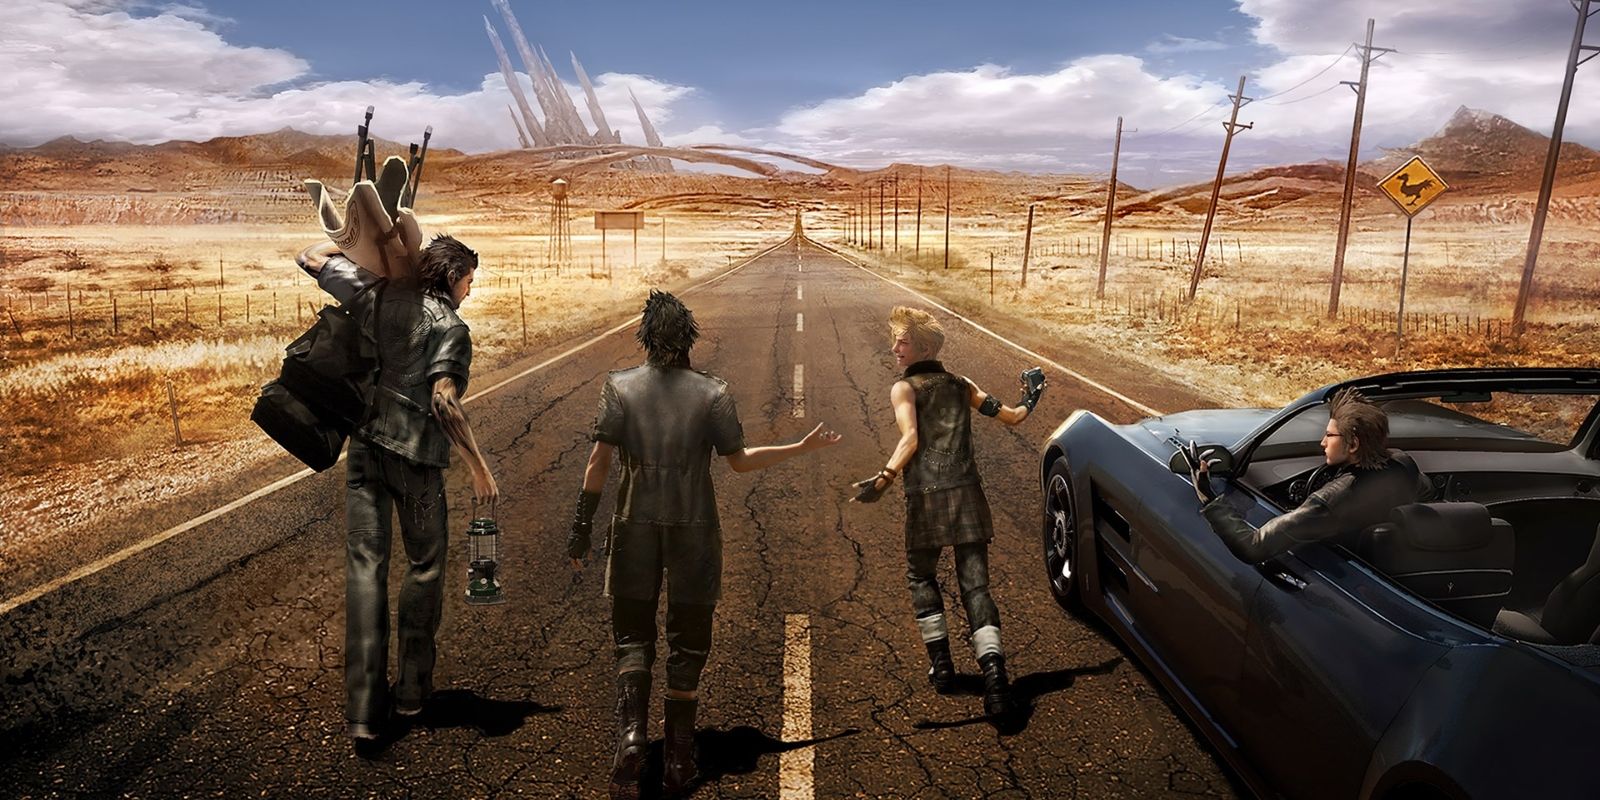 Final Fantasy XV characters walking down a road together